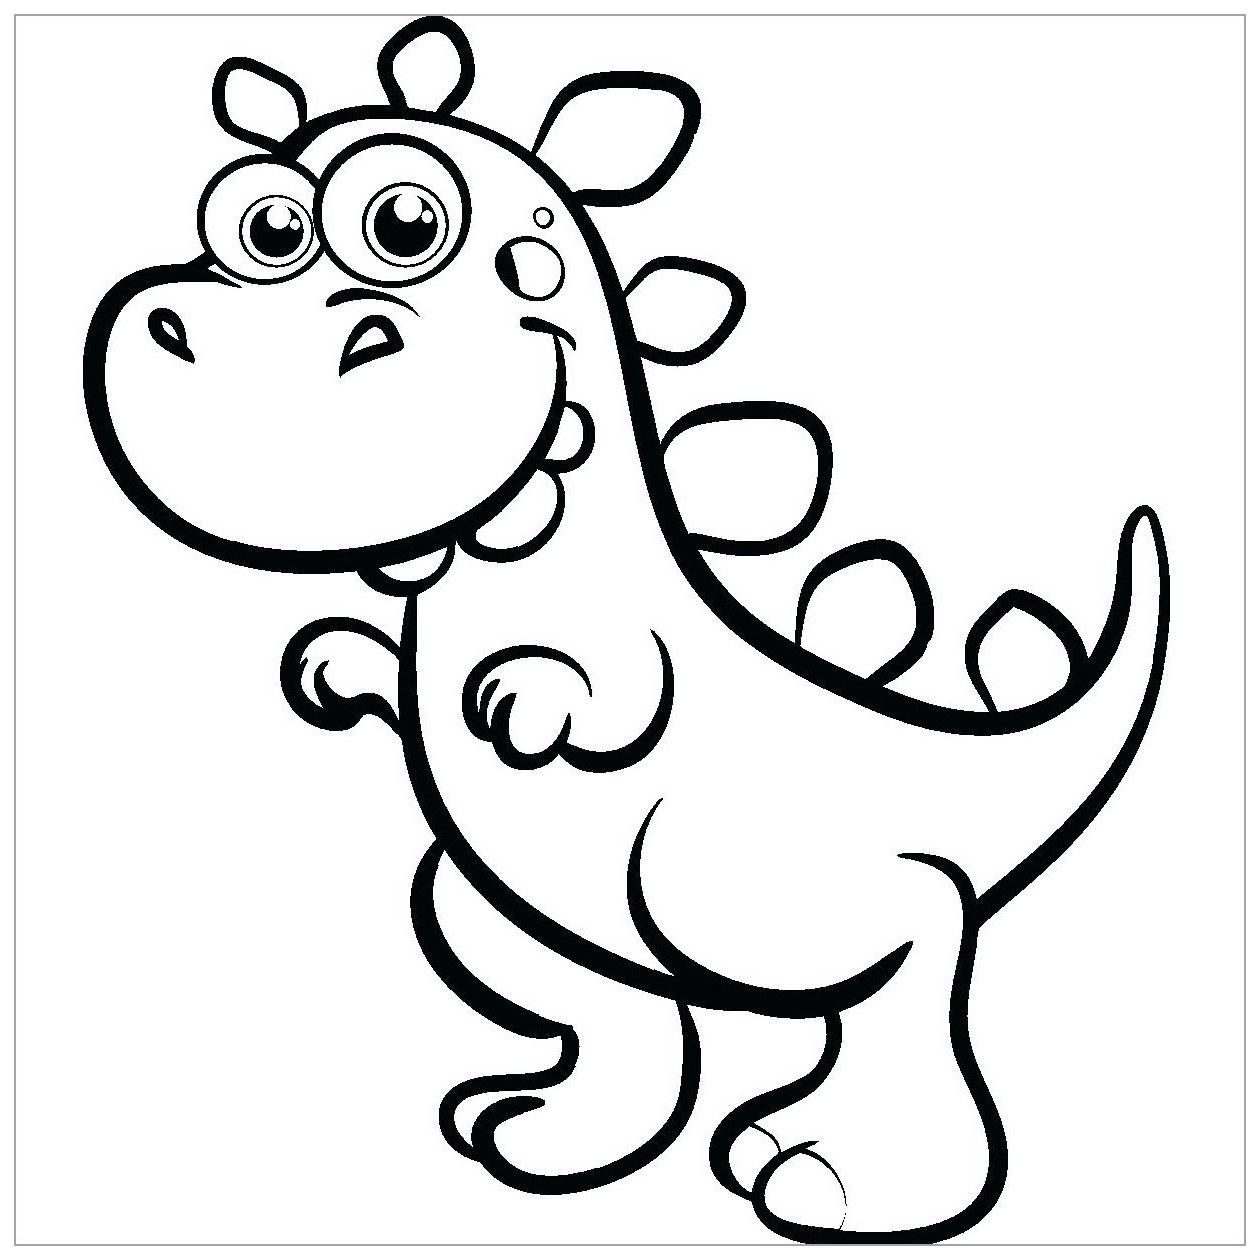 dinosaur-coloring-pages-50-best-pages-for-kids-world-of-printables